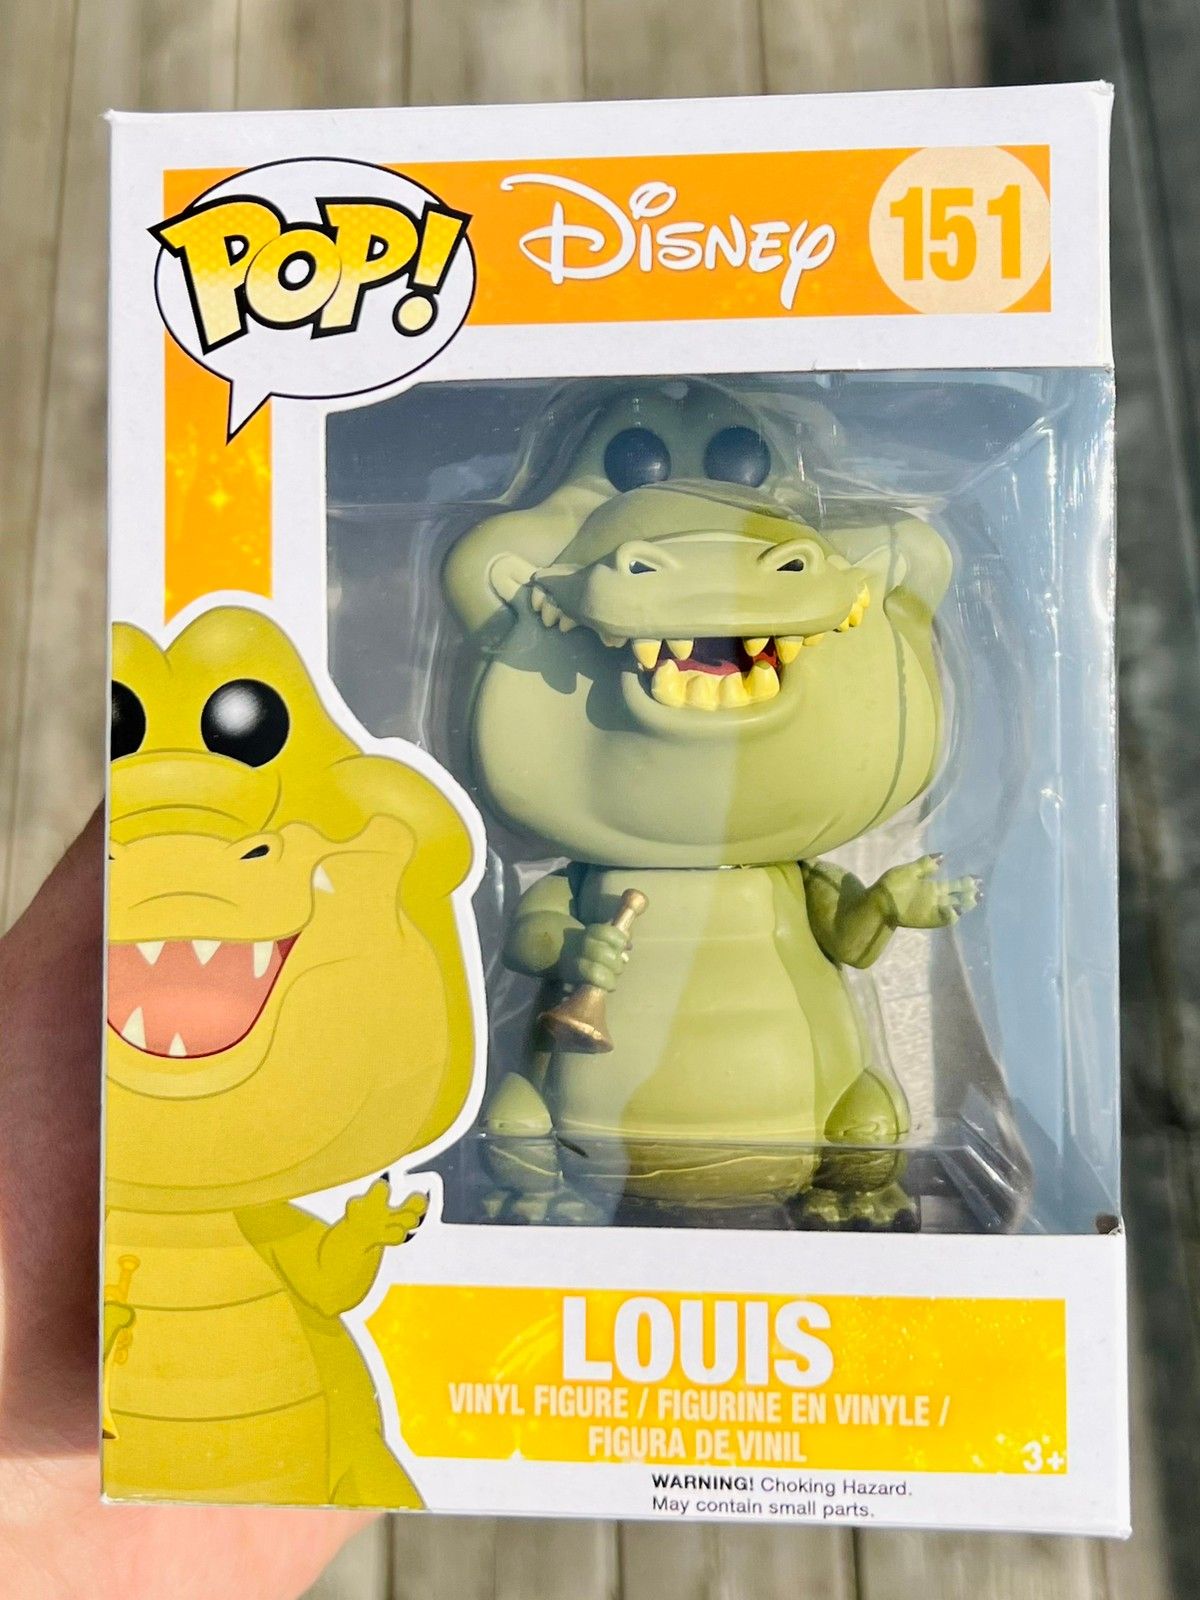 Funko Pop! Louis, The Princess and the Frog, Disney (151)